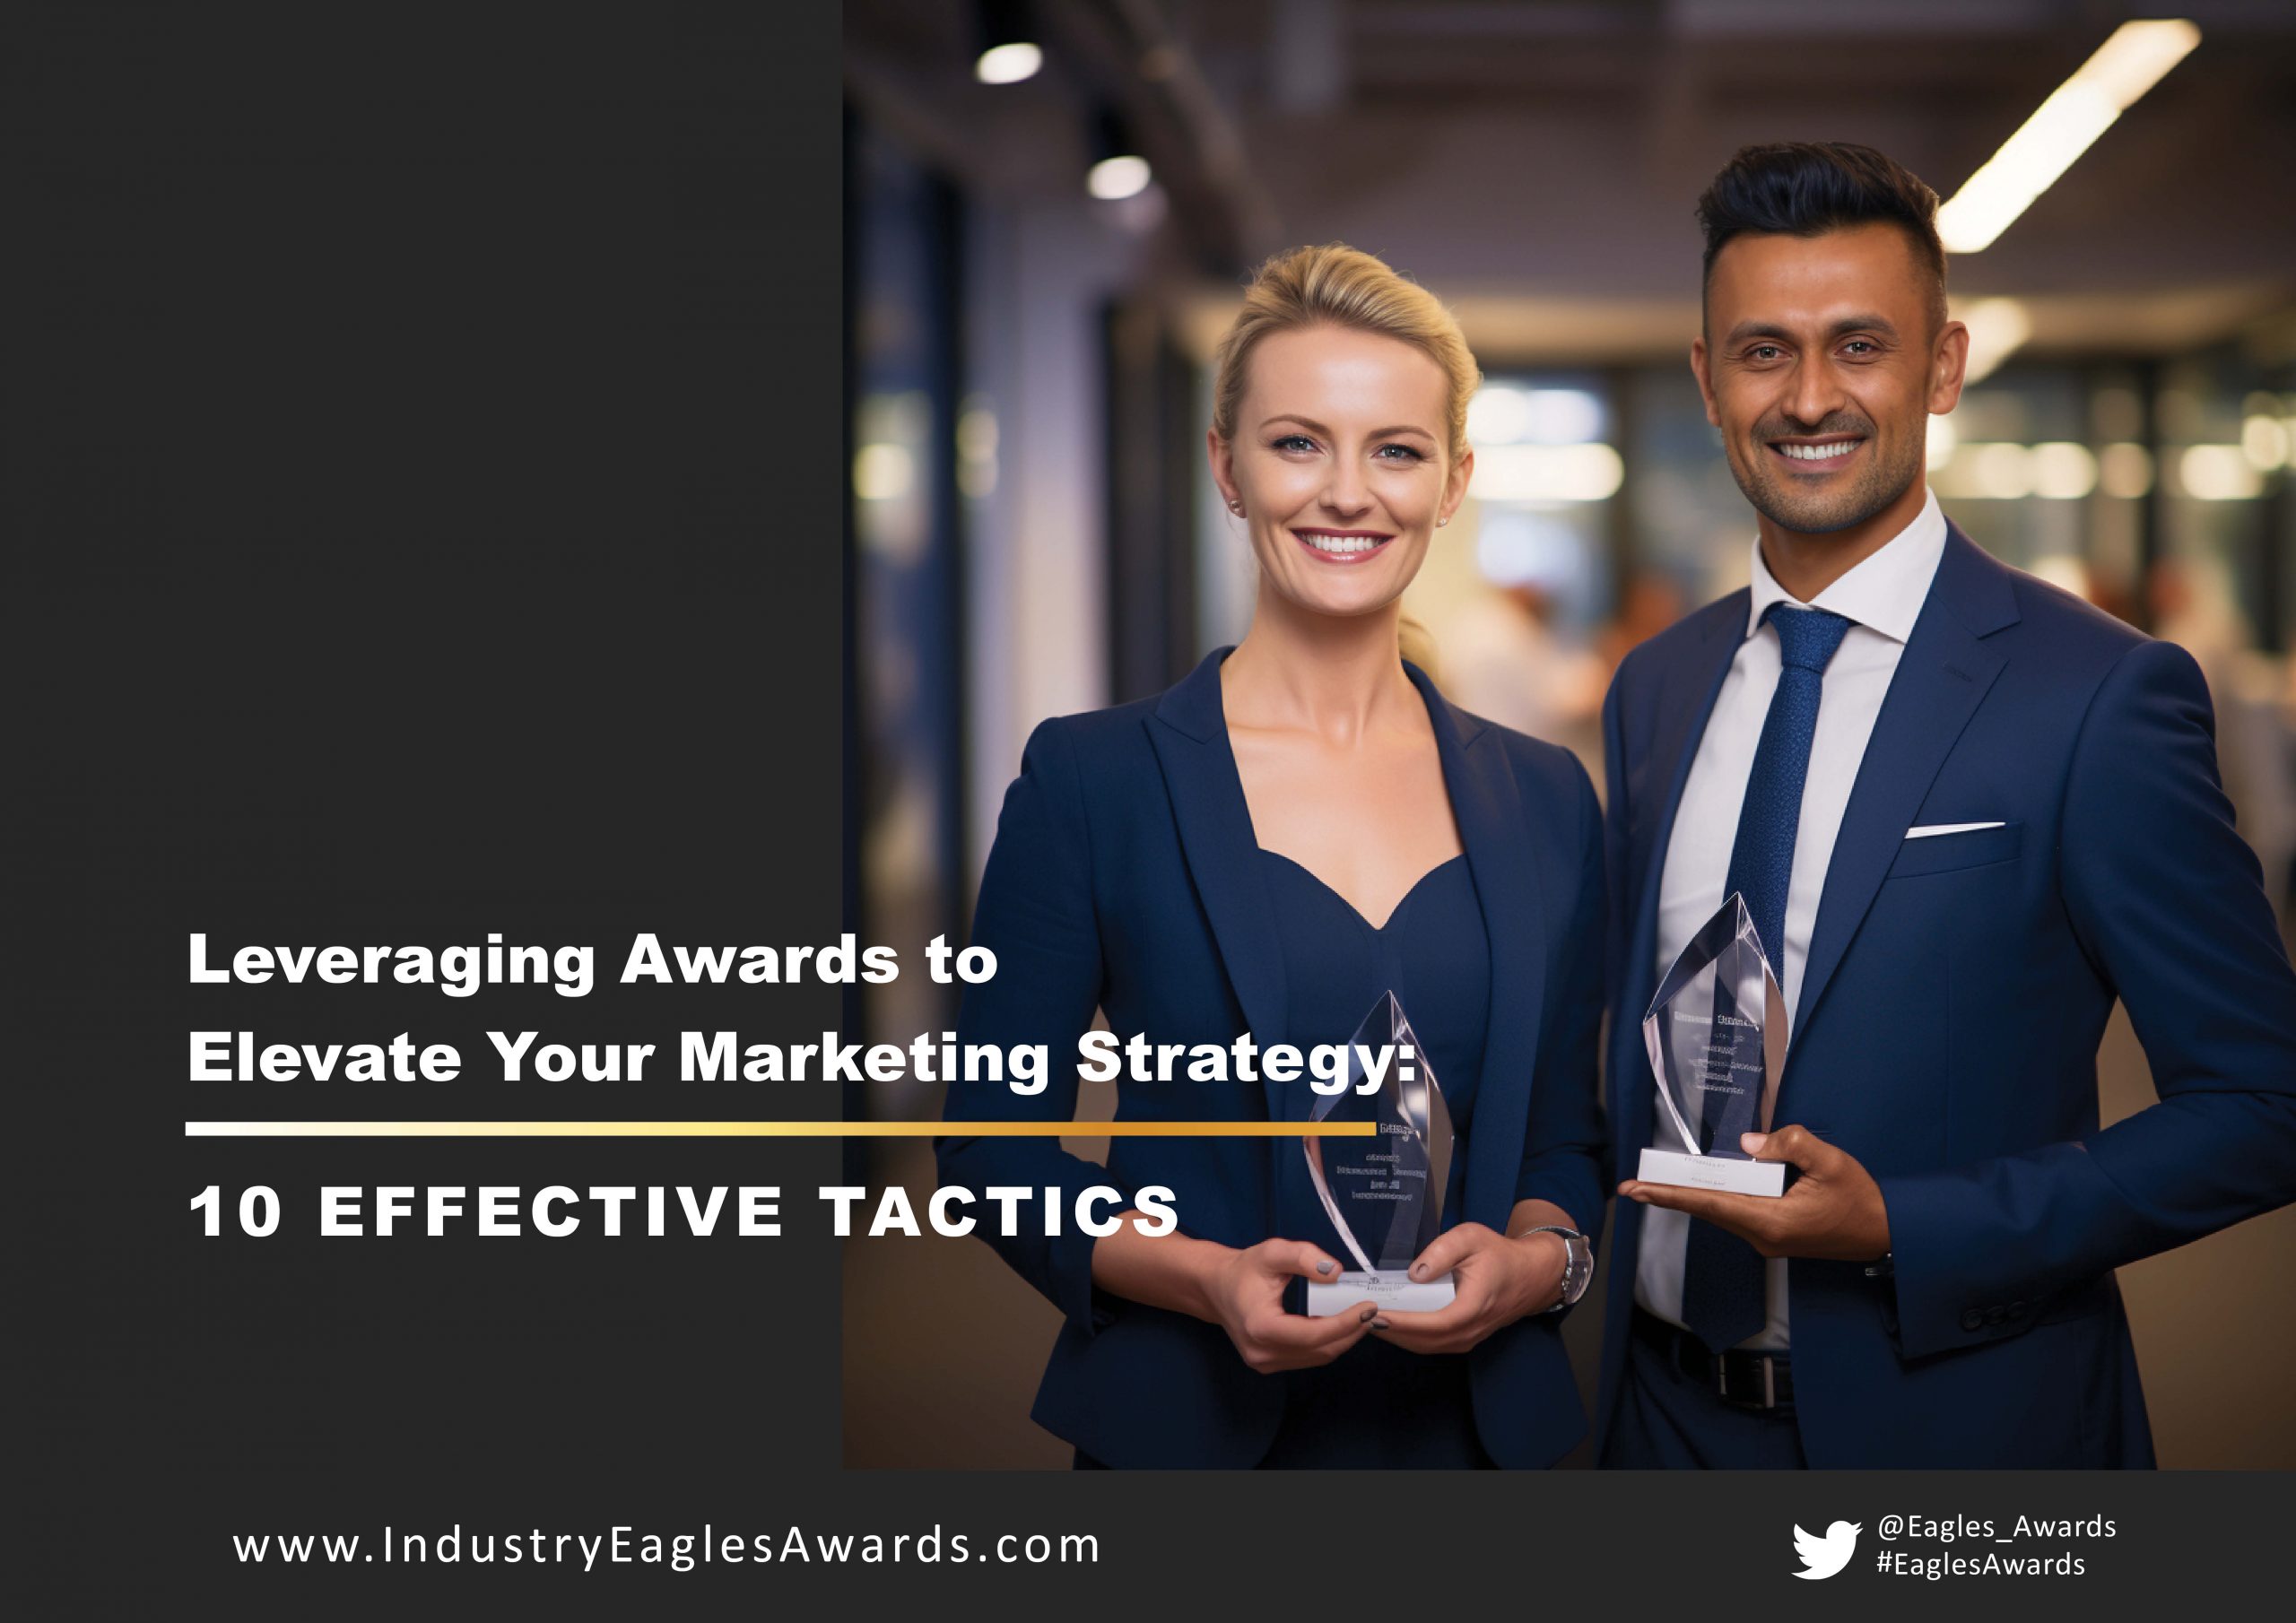 Leveraging Awards to Elevate Your Marketing Strategy- 10 Effective Tactics